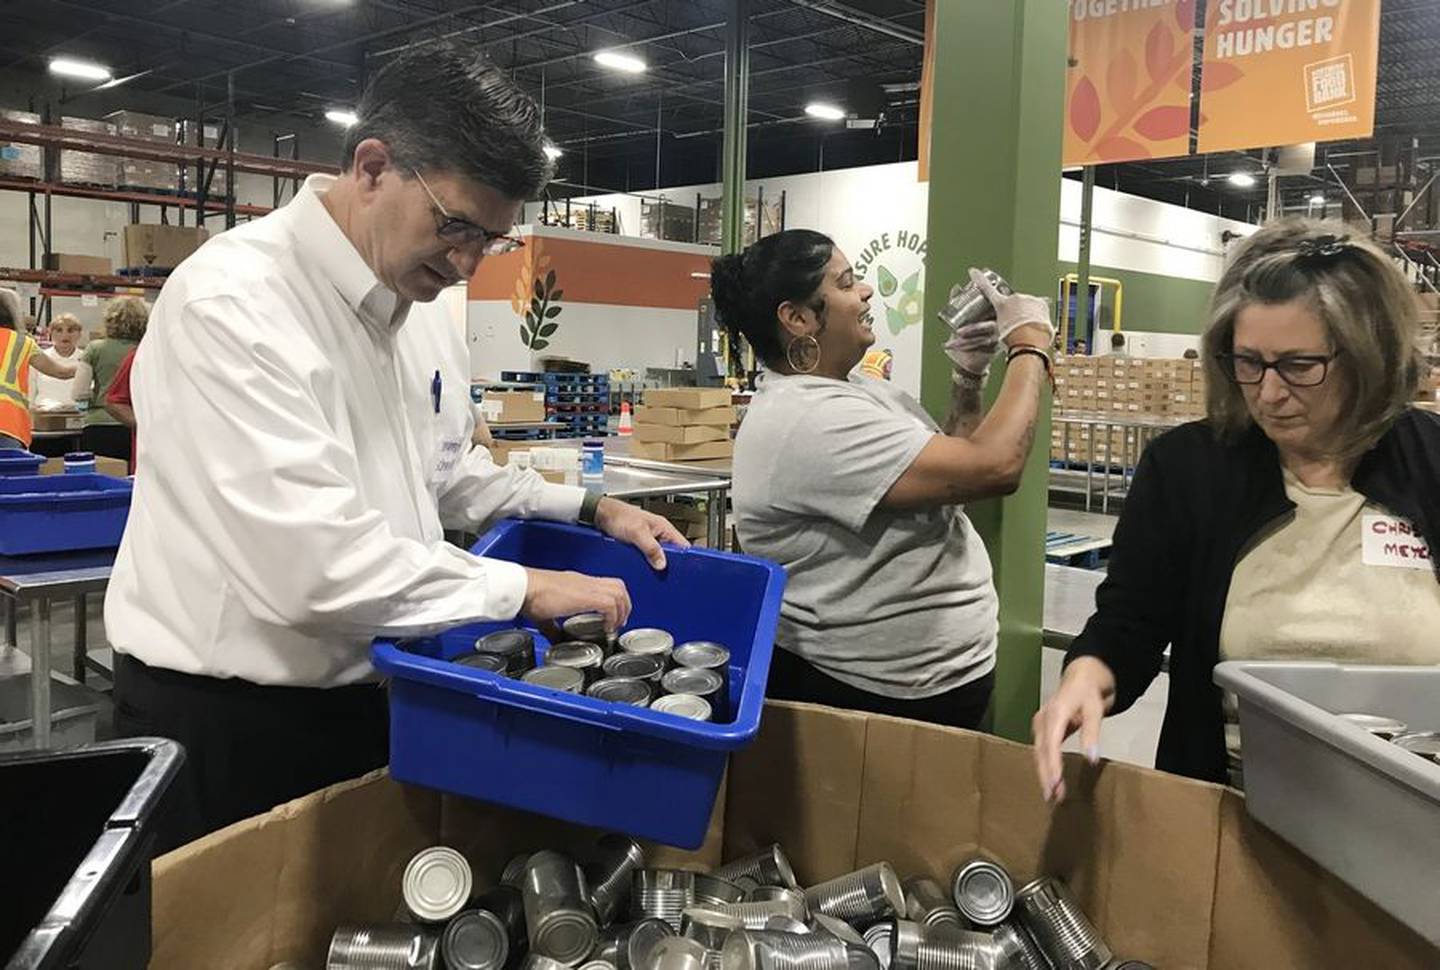 U.S. Rep. Brad Schneider, left, learns about food sorting Wednesday, Aug. 16, 2023, at the Northern Illinois Food Bank's north suburban distribution center in Lake Forest. Schneider secured $750,000 in funding for the new, expanded facility celebrating its anniversary.